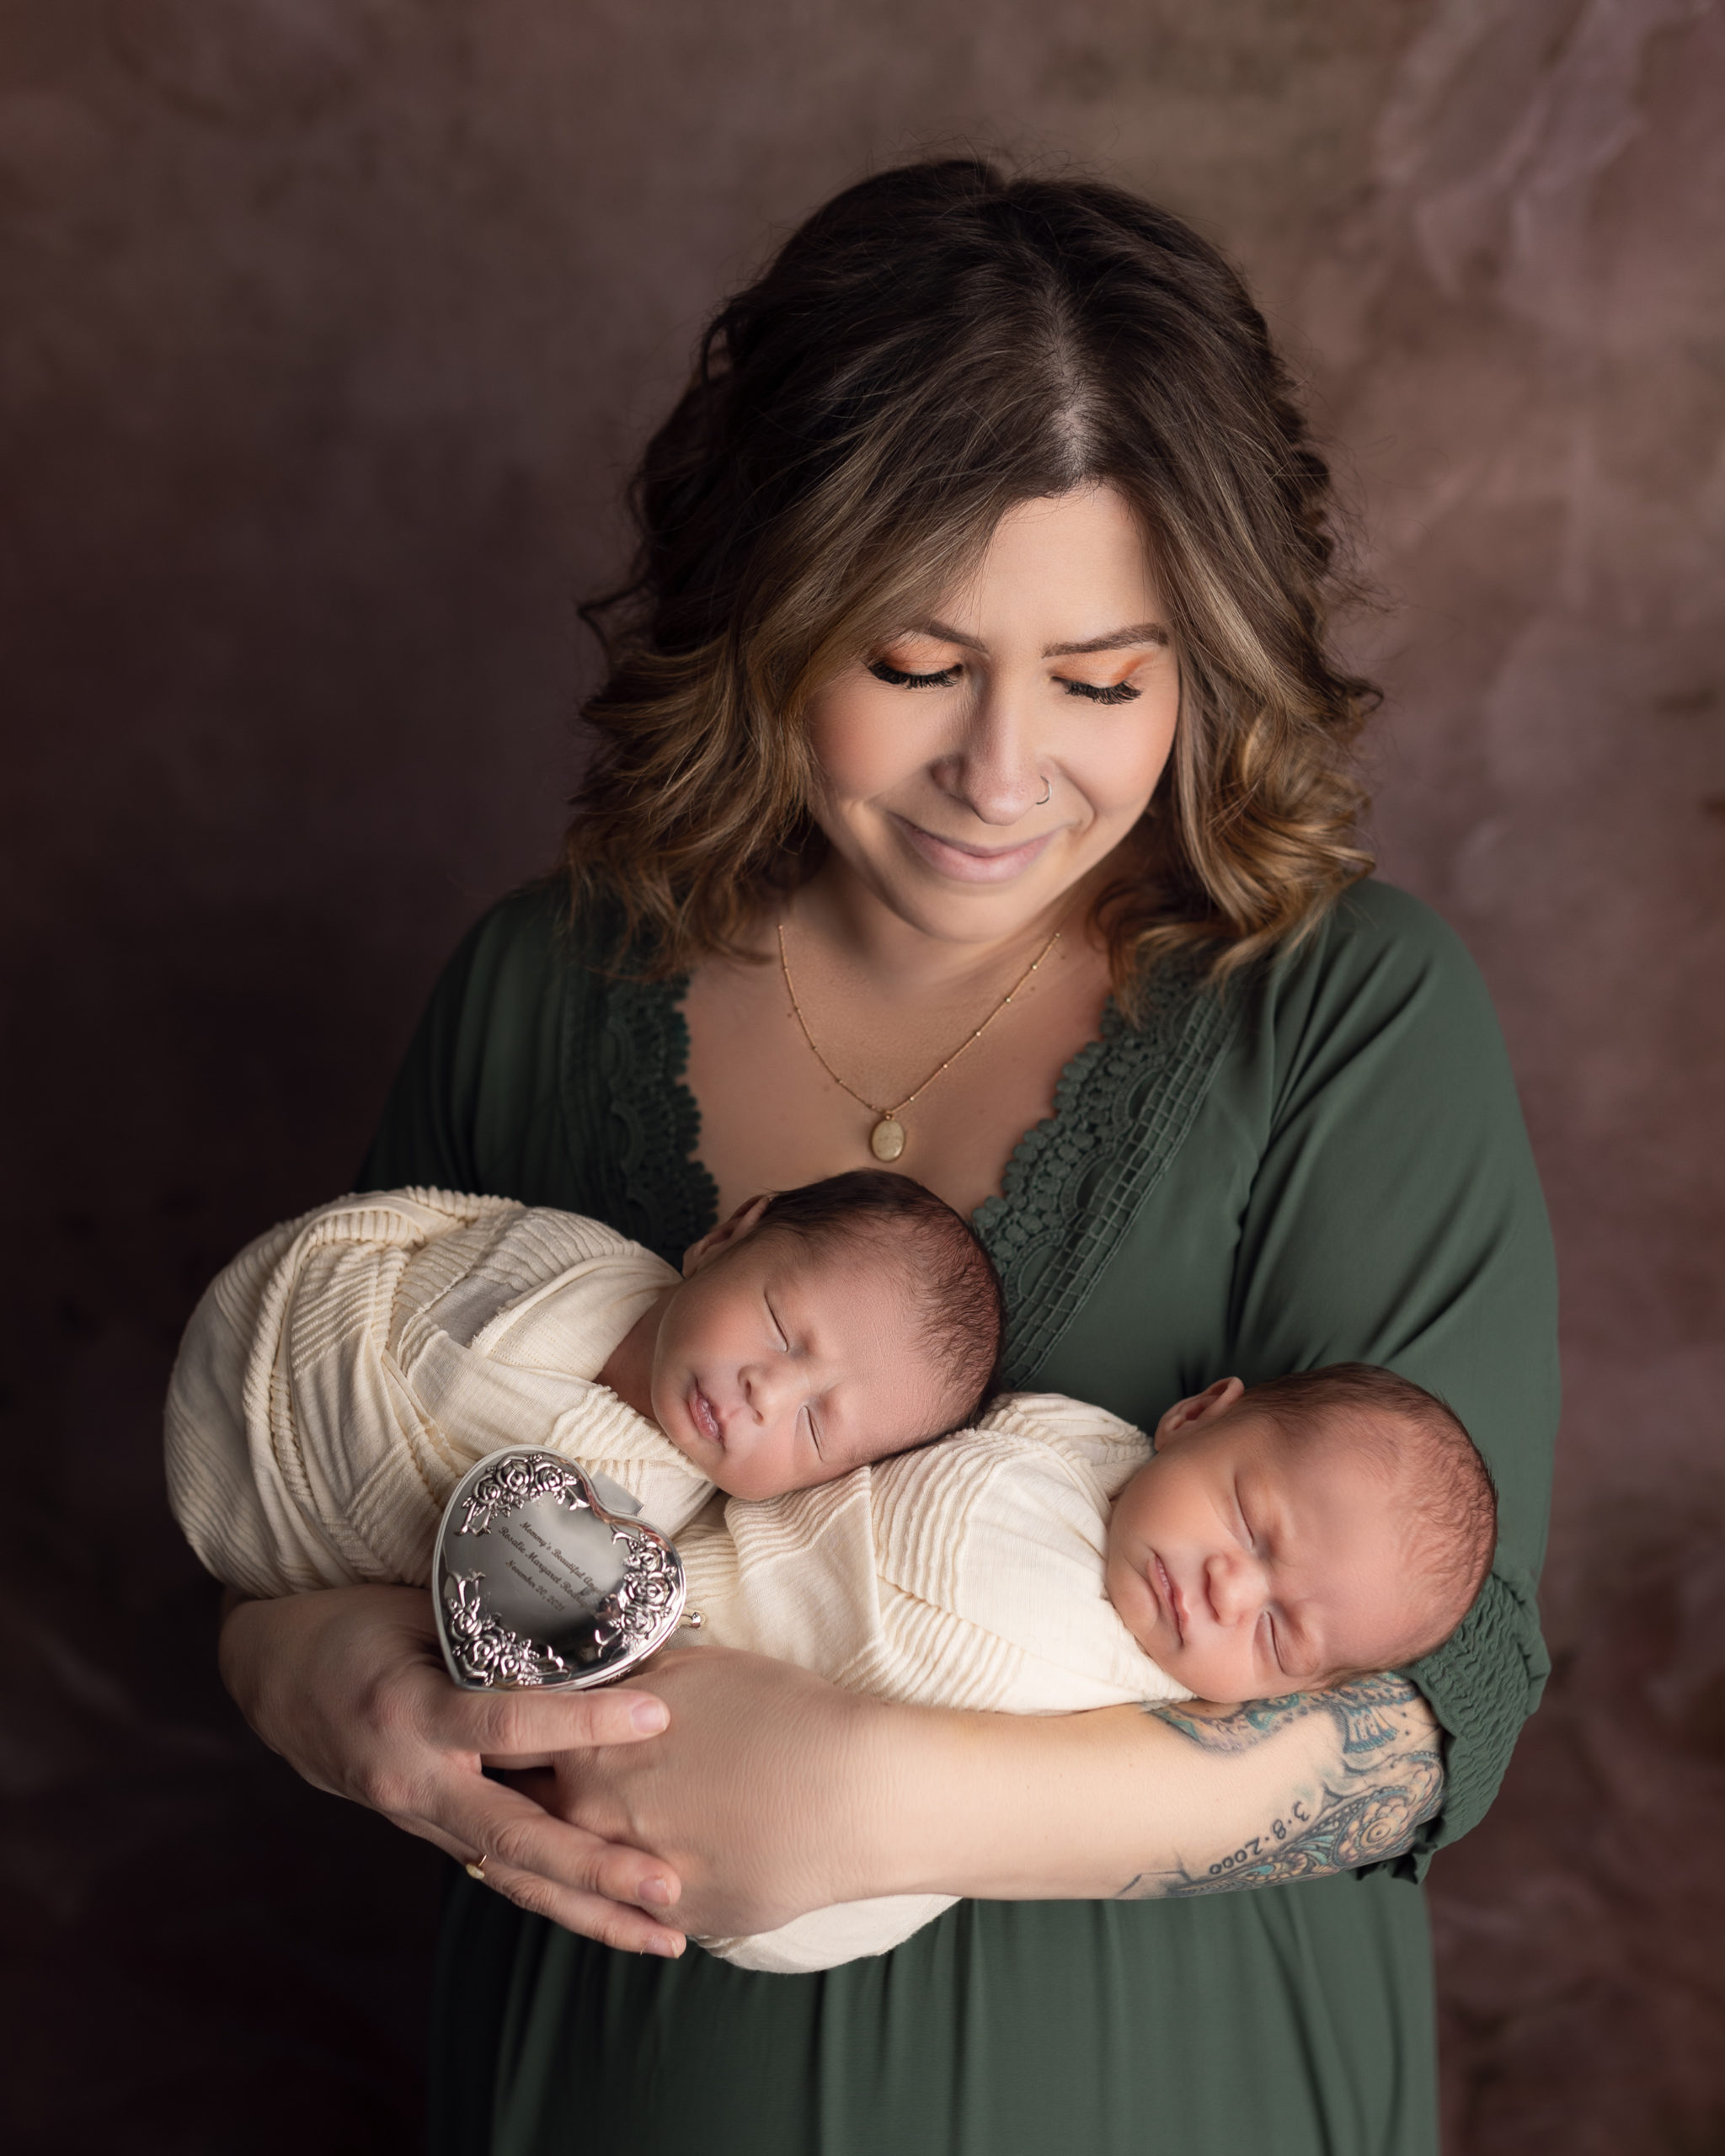 signs of post partum depression in blog photo of mom holding newborn twins